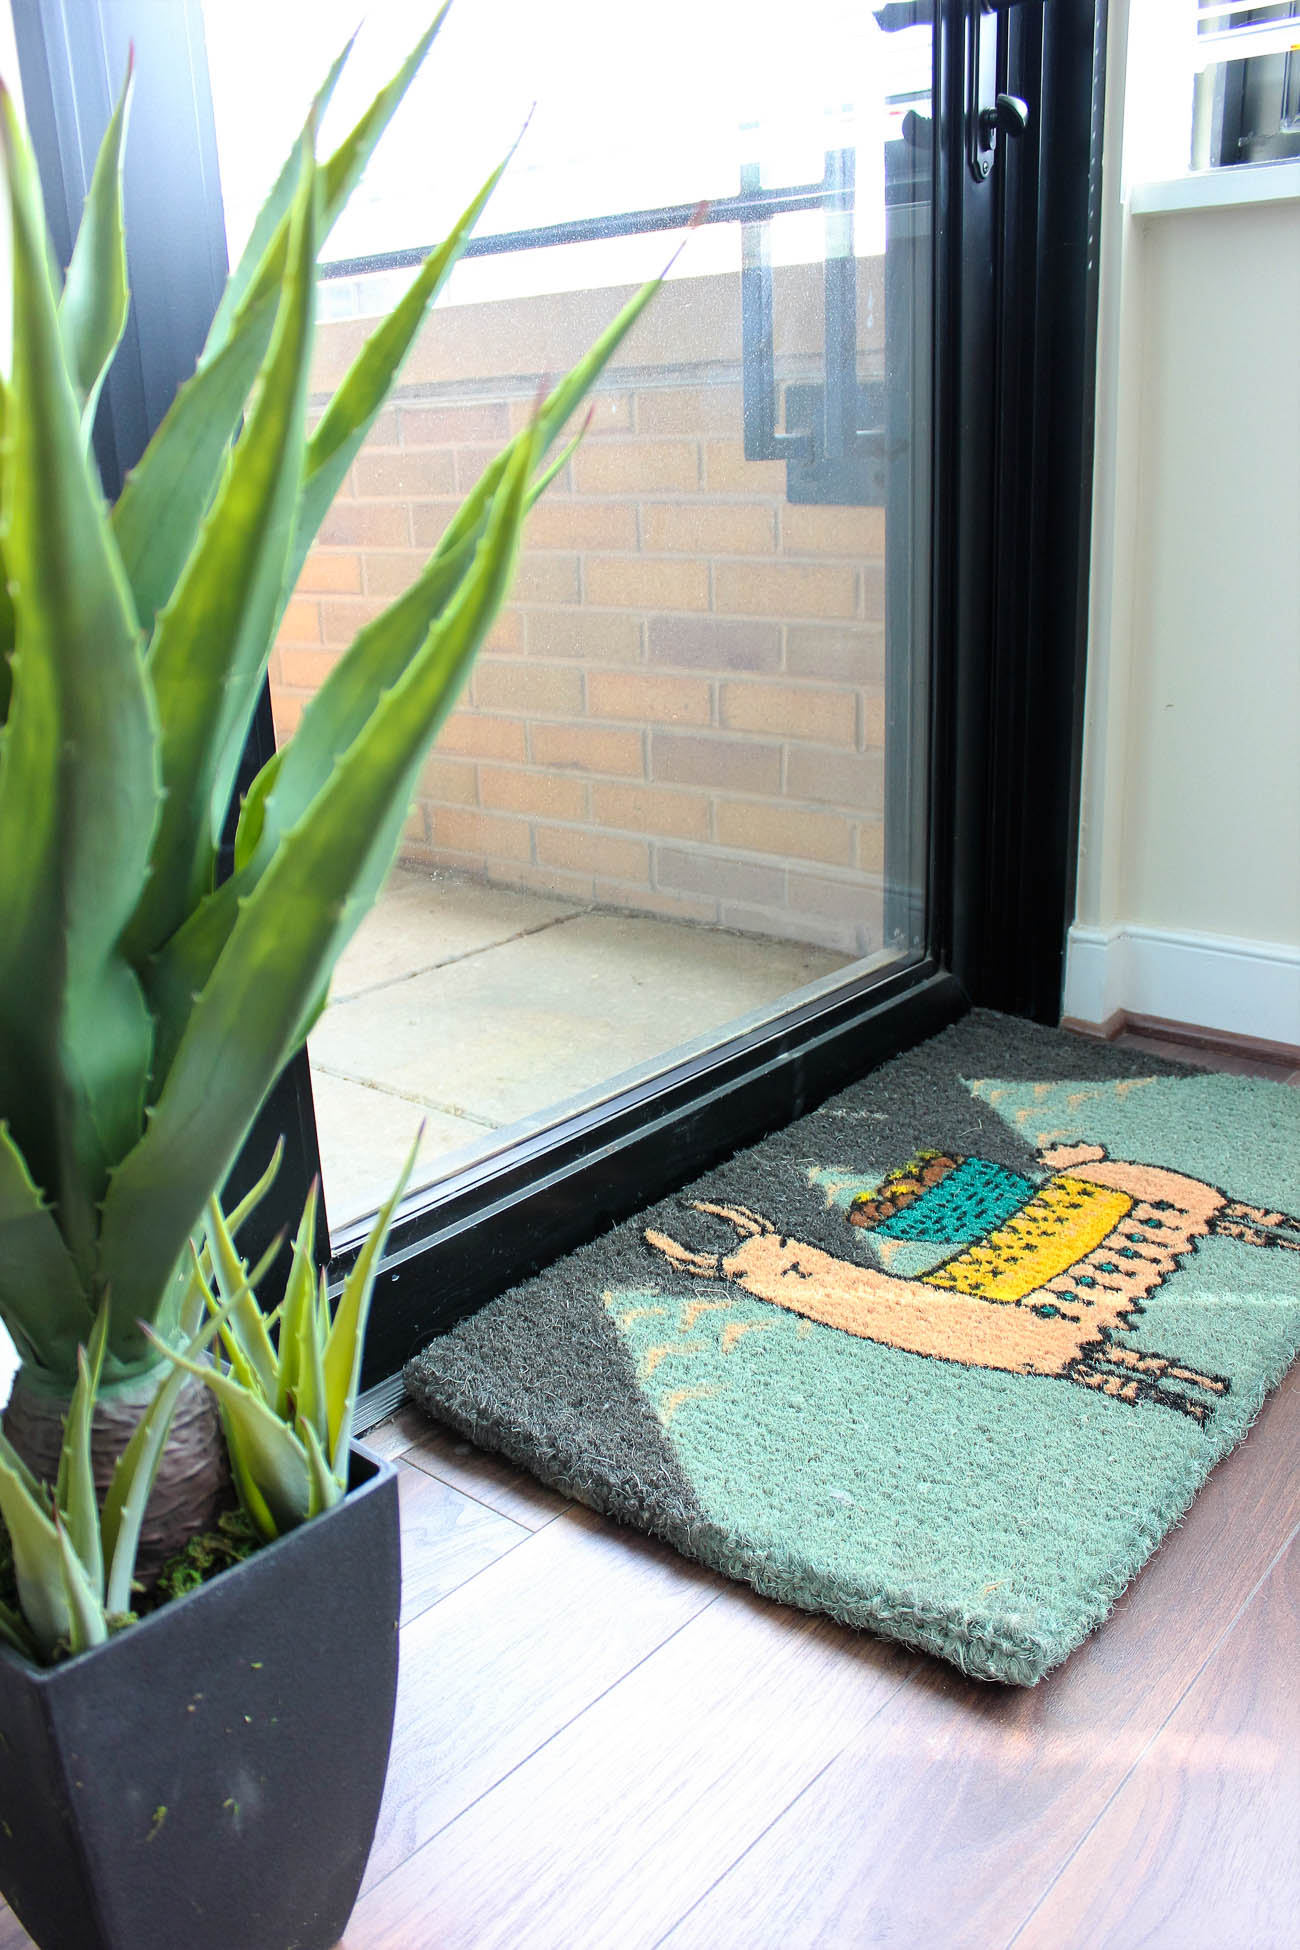 Decorating Your Home with UncommonGoods | Something Good, home decor, decorating,, door mats @danaerinw